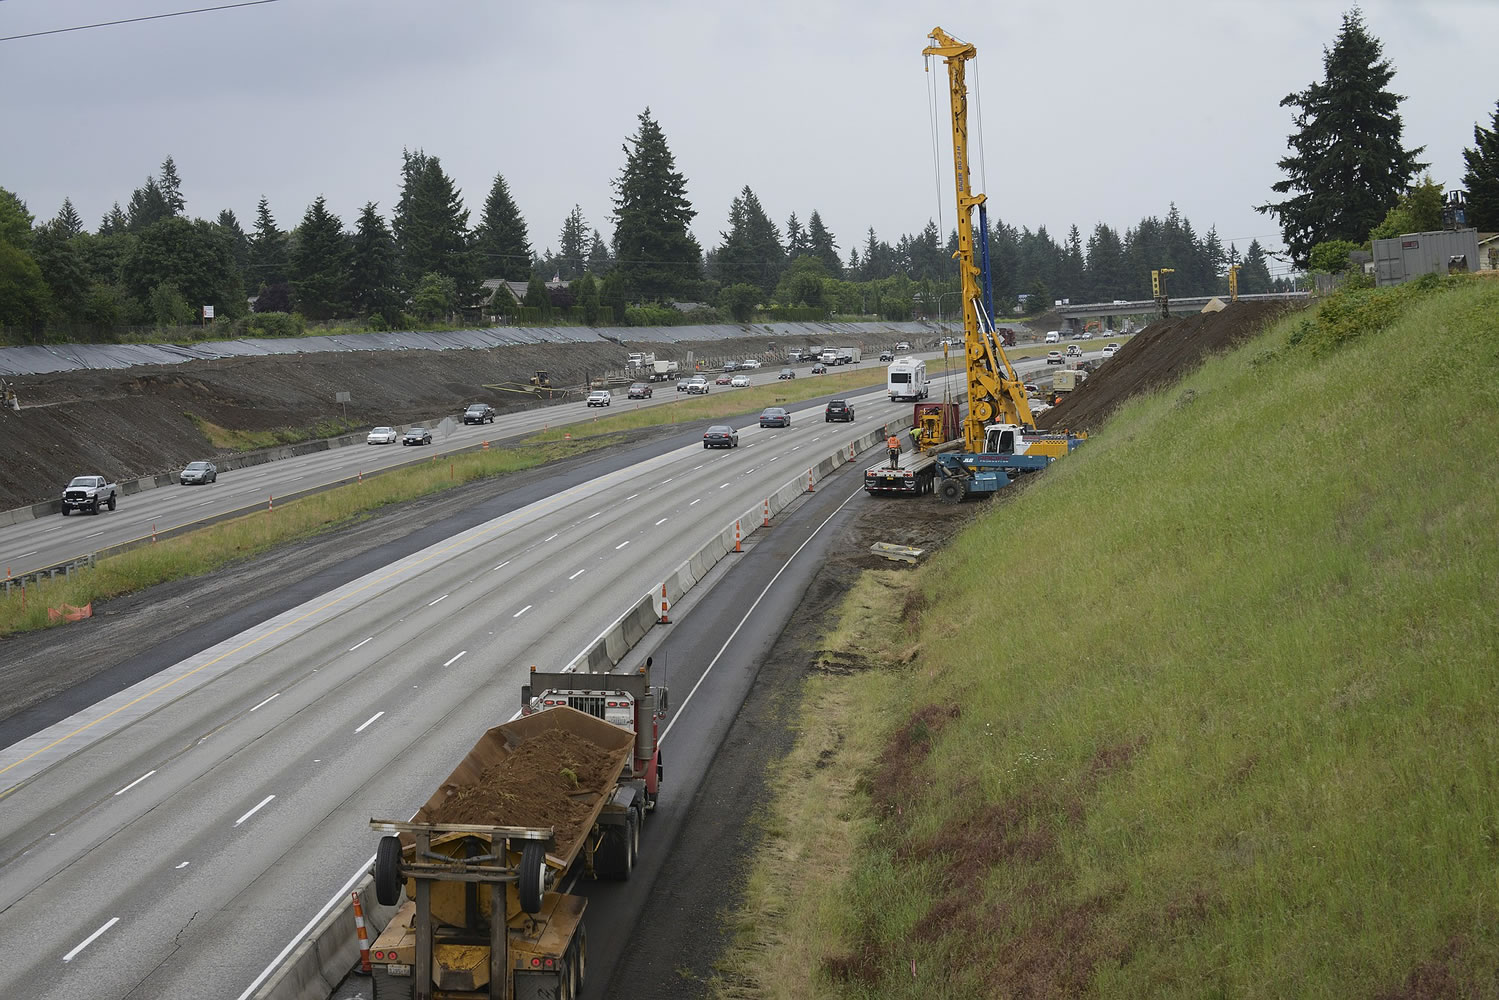 Photos by Ariane Kunze/The Columbian
Construction crews are building a new interchange at Interstate 205 and Northeast 18th Street in Vancouver. Currently, there are no interchanges on I-205 between Southeast Mill Plain Boulevard and state Highway 500.